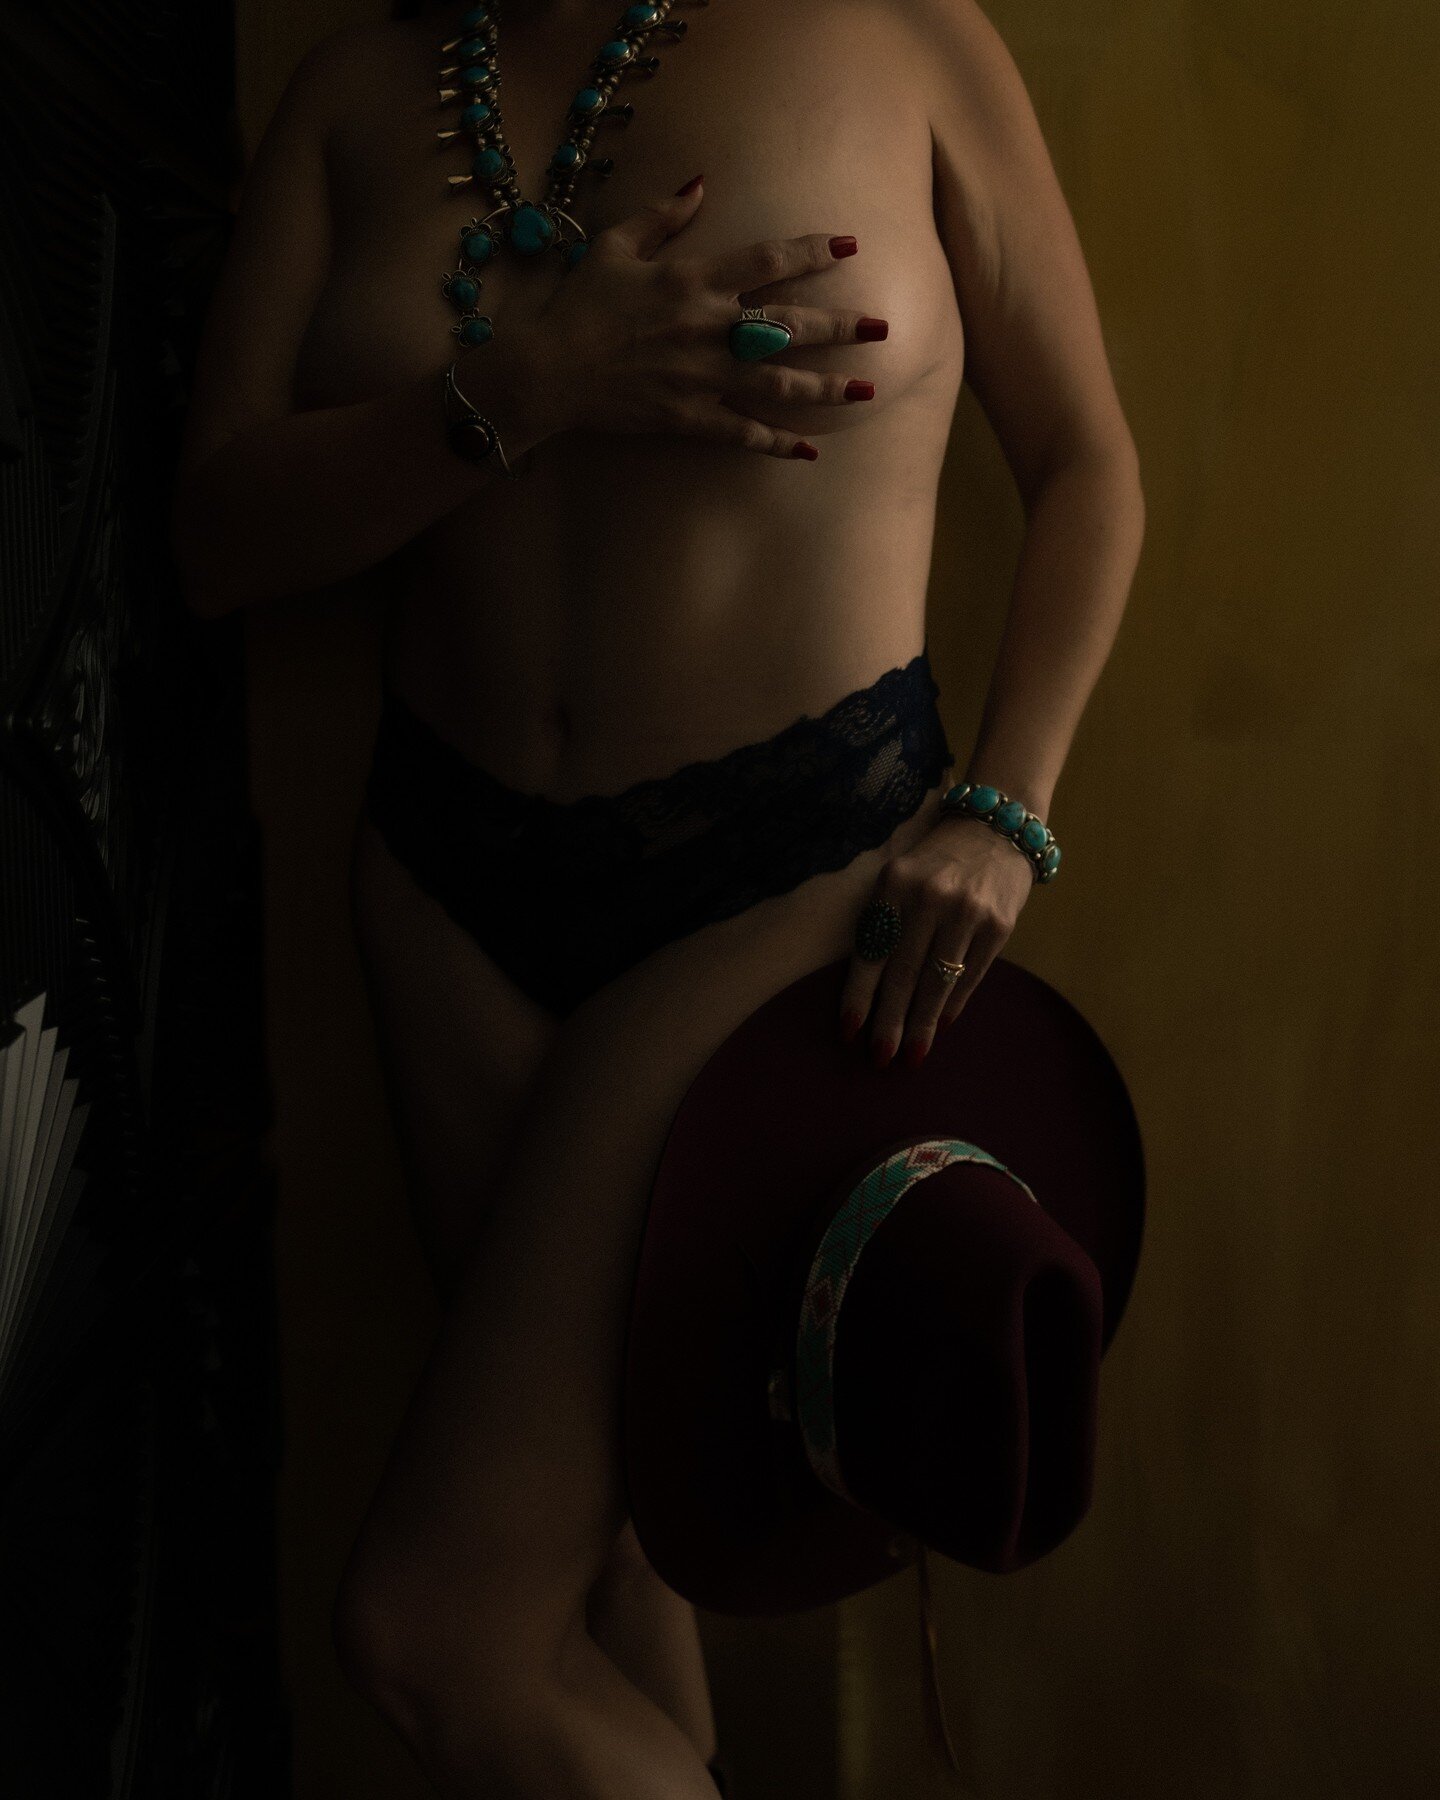 It's been a hot minute since I've dropped in and I'm excited to share this image with you. Look closely, and you'll catch a glimpse of a story woven into the details. 

In this shot, she's holding a cowboy hat like it holds a delicious secret, adorne